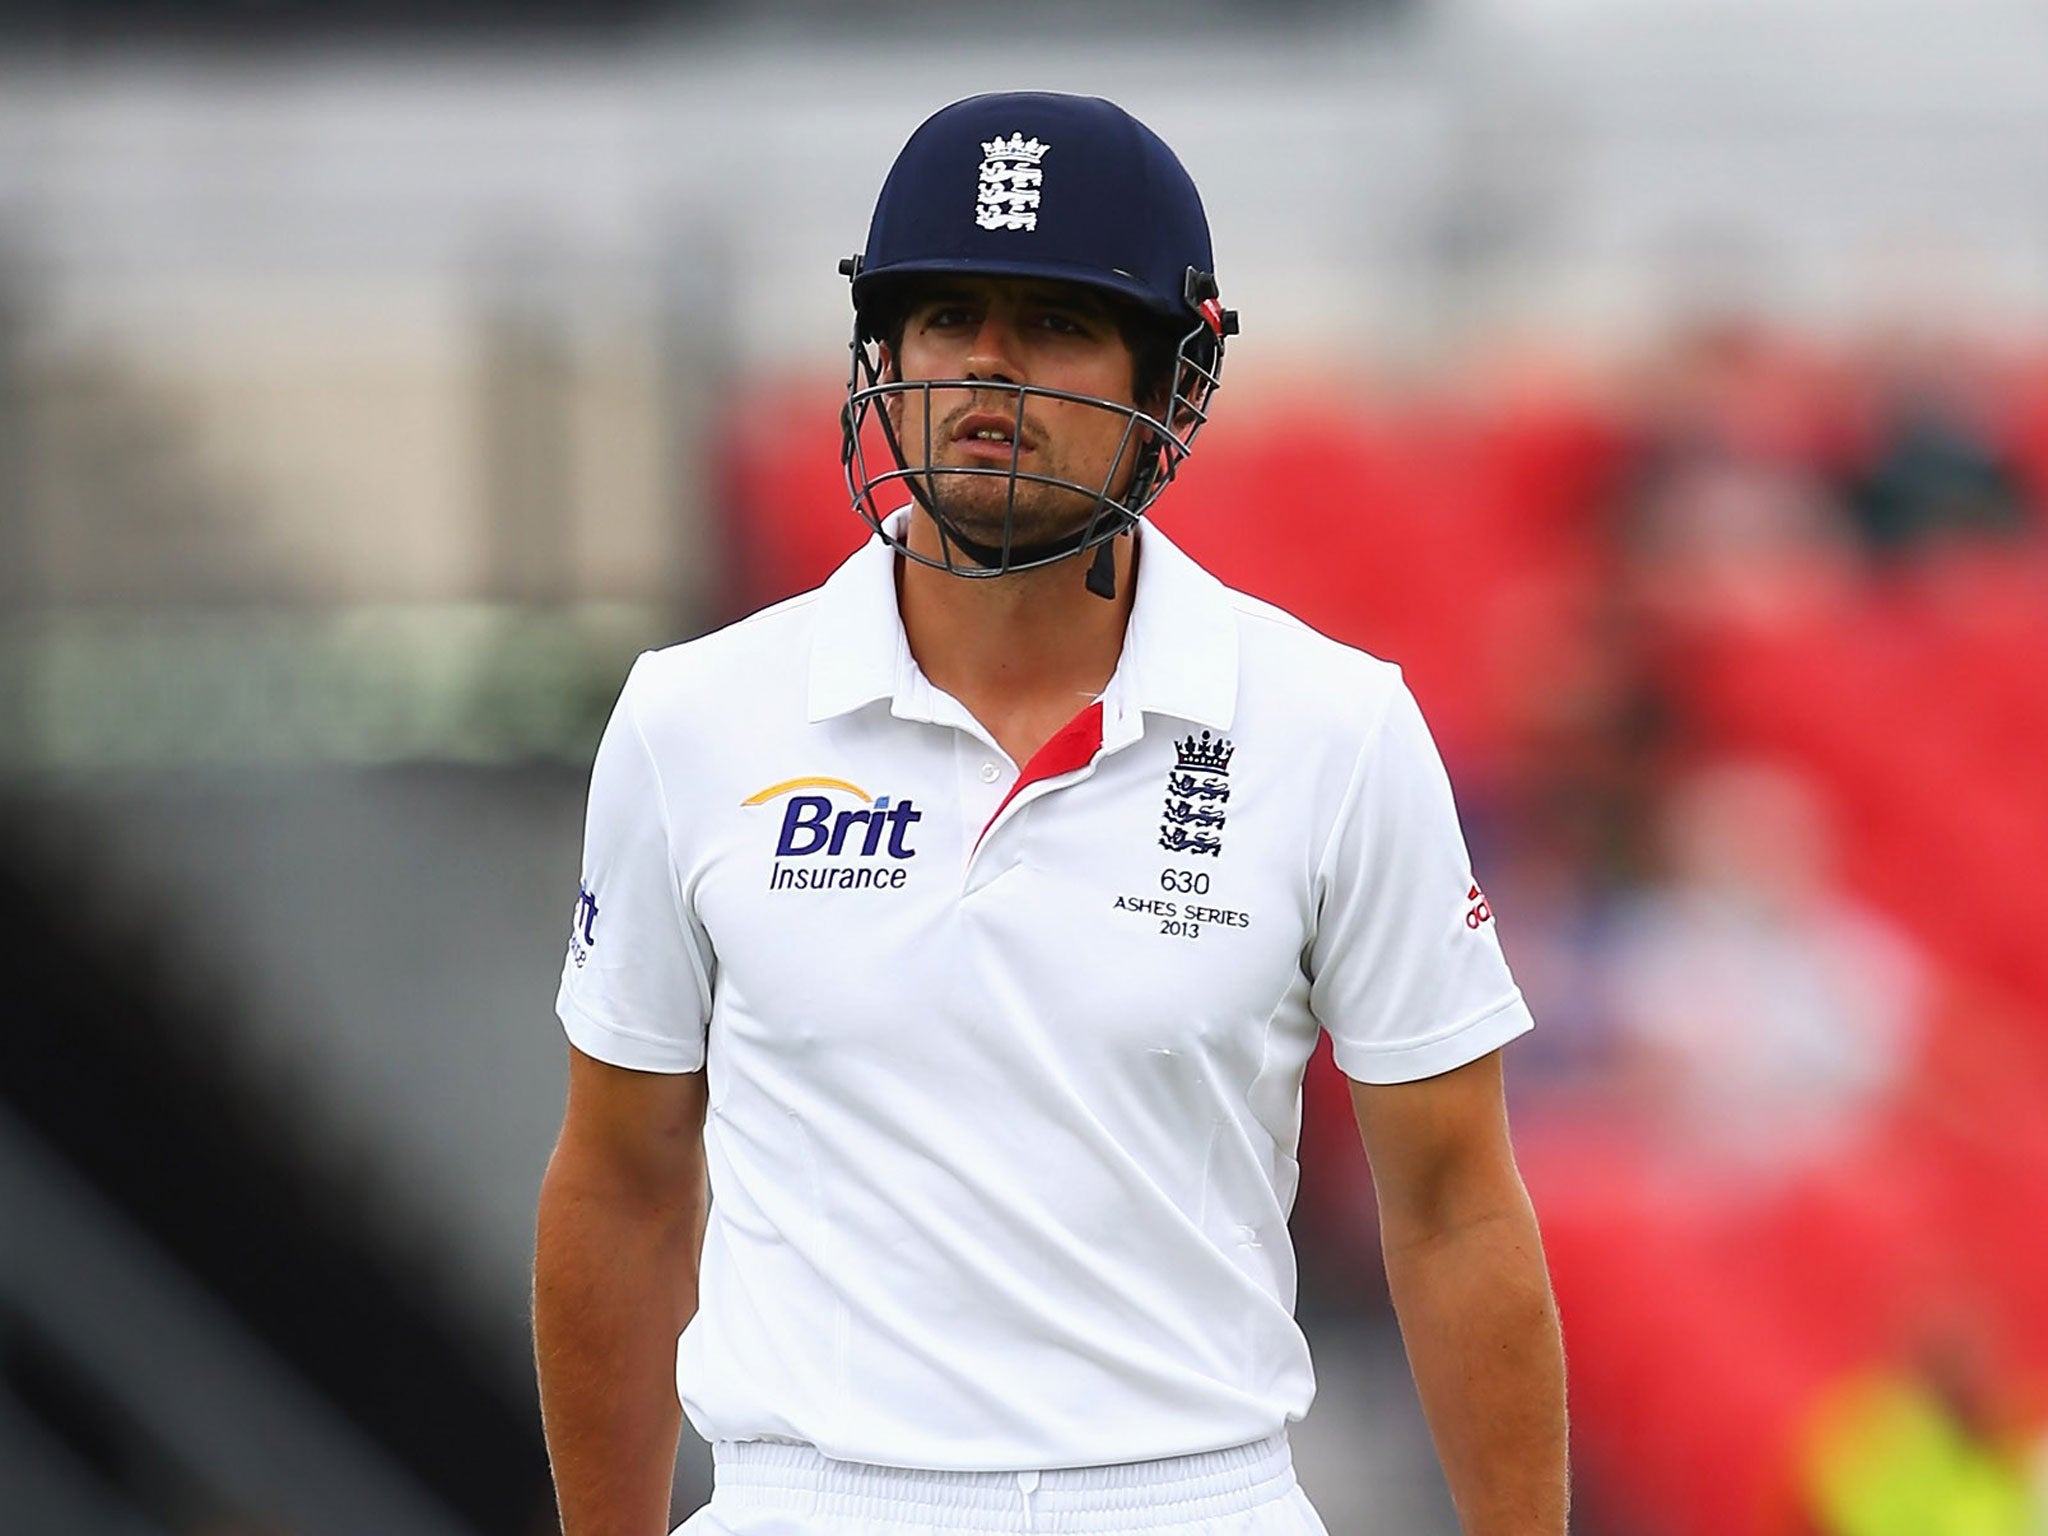 Alastair Cook: England captain made a highly dubious decision to review his wicket yesterday